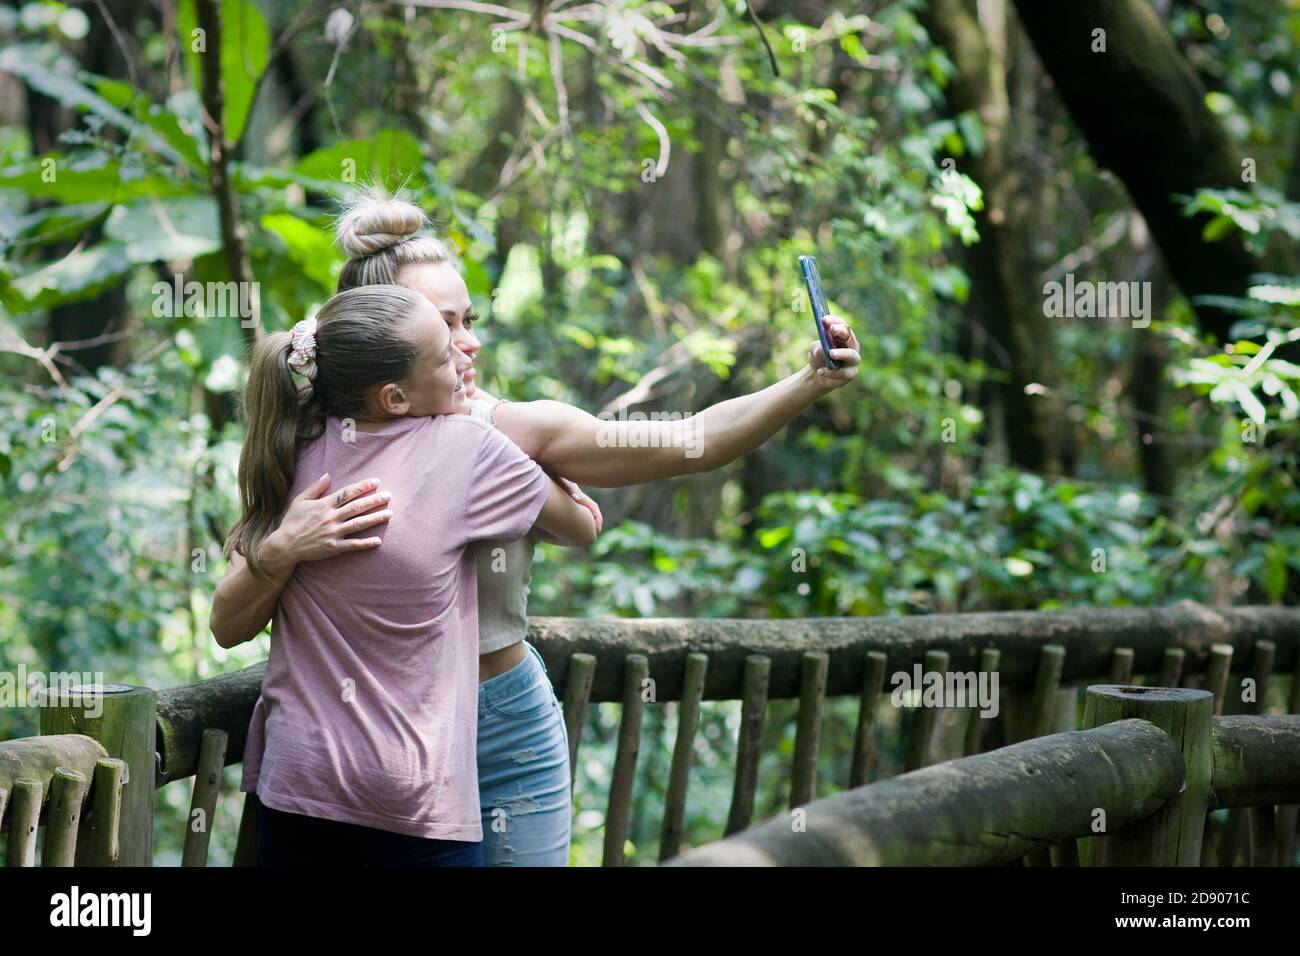 A mother and daughter take a selfie photo at a park. Stock Photo